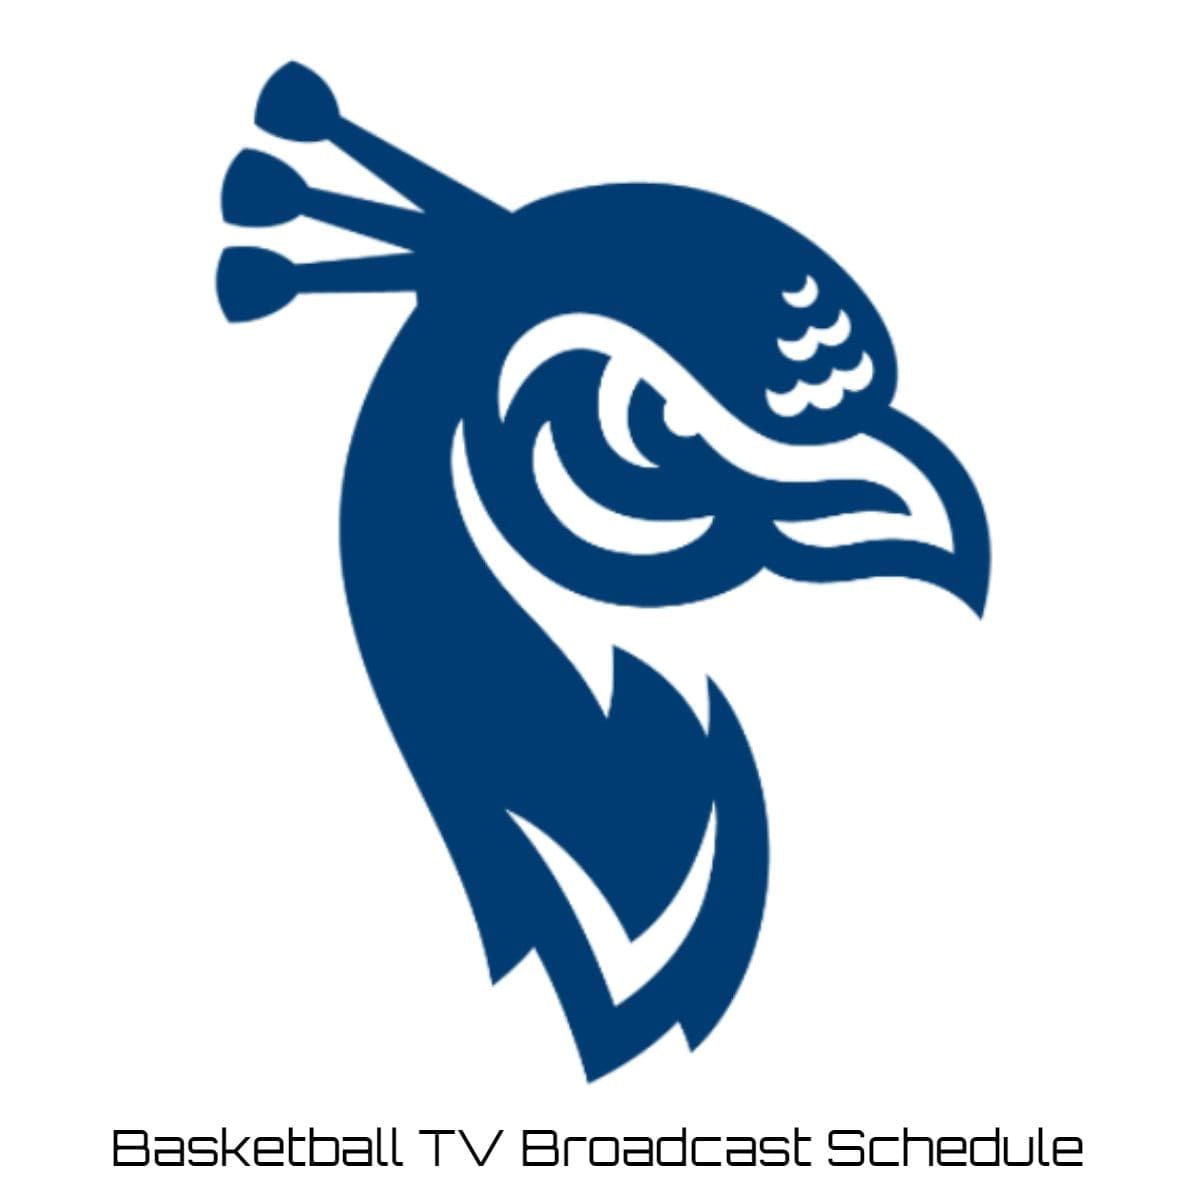 St. Peter's Peacocks Basketball TV Broadcast Schedule